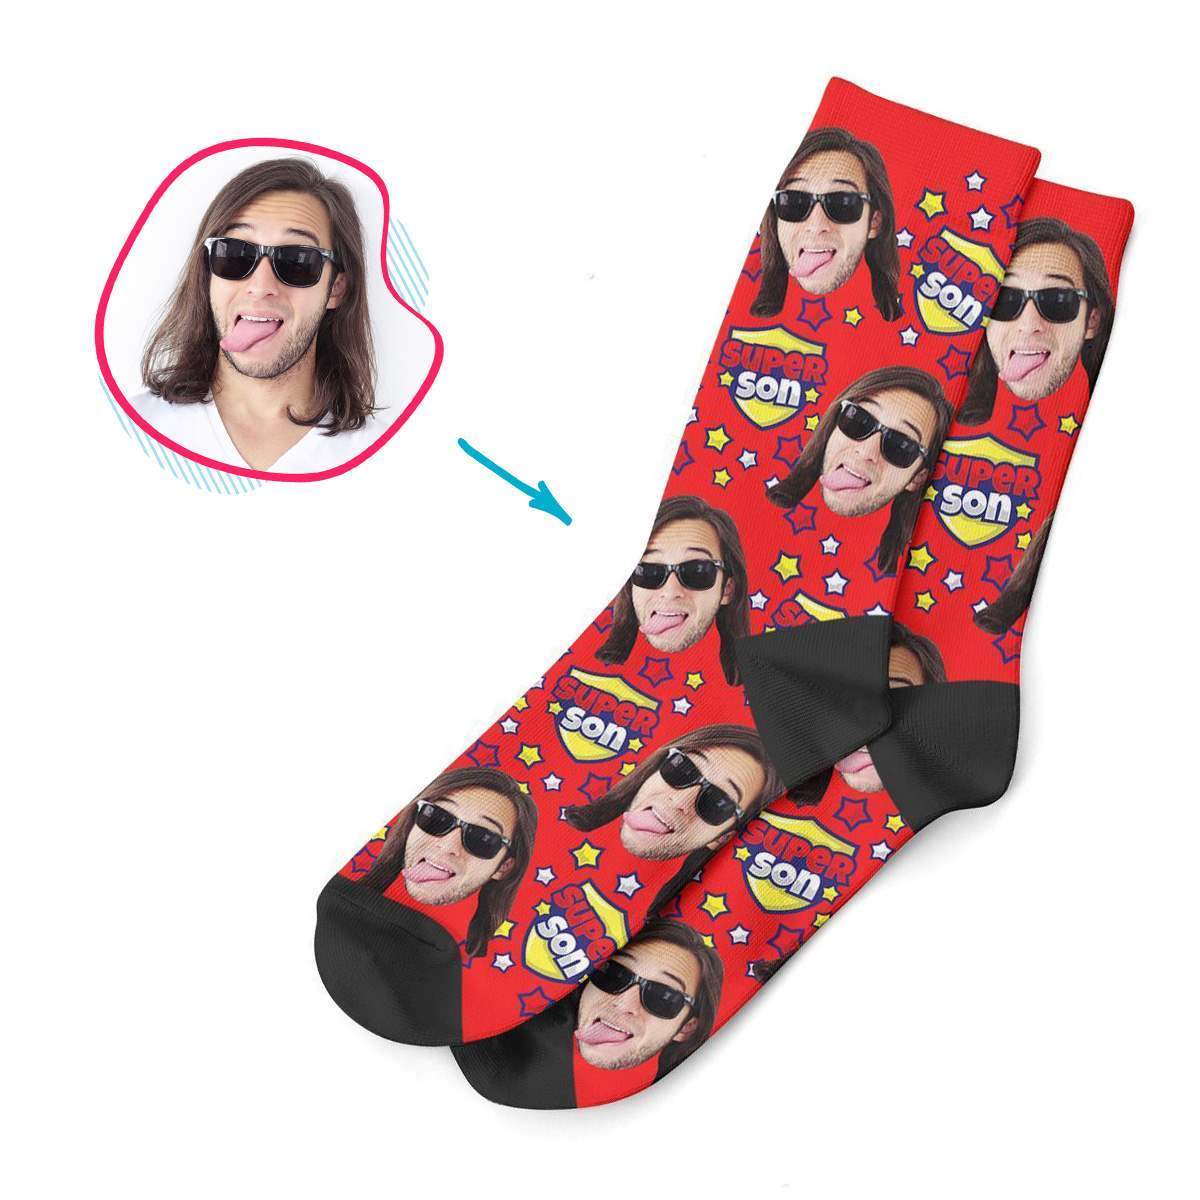 red Super Son socks personalized with photo of face printed on them